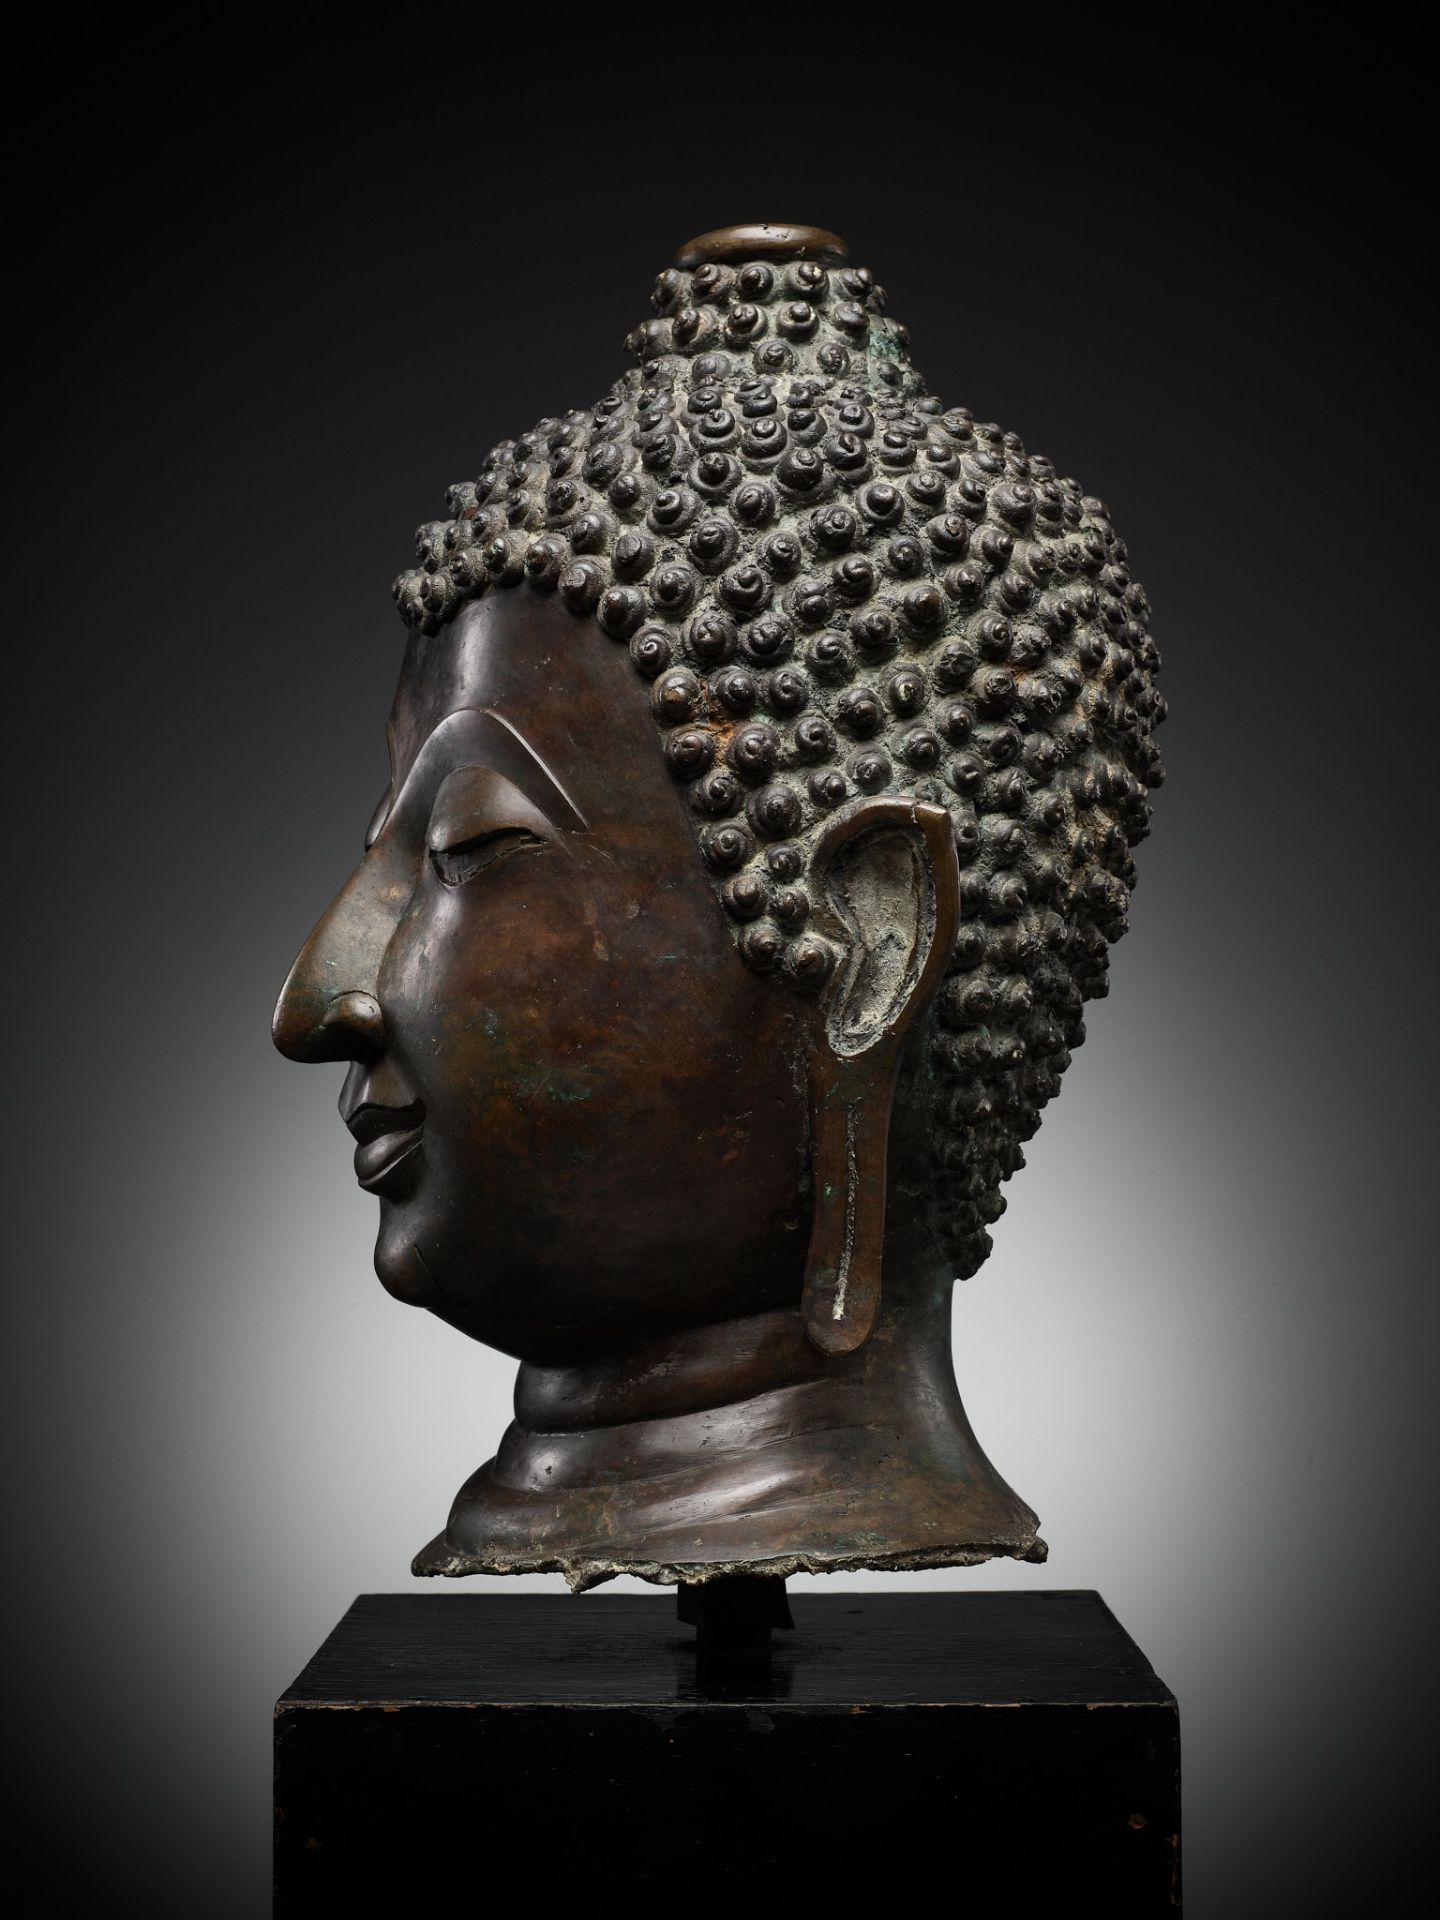 A MONUMENTAL BRONZE HEAD OF BUDDHA, LAN NA, NORTHERN THAILAND, 14TH-15th CENTURY - Image 10 of 16